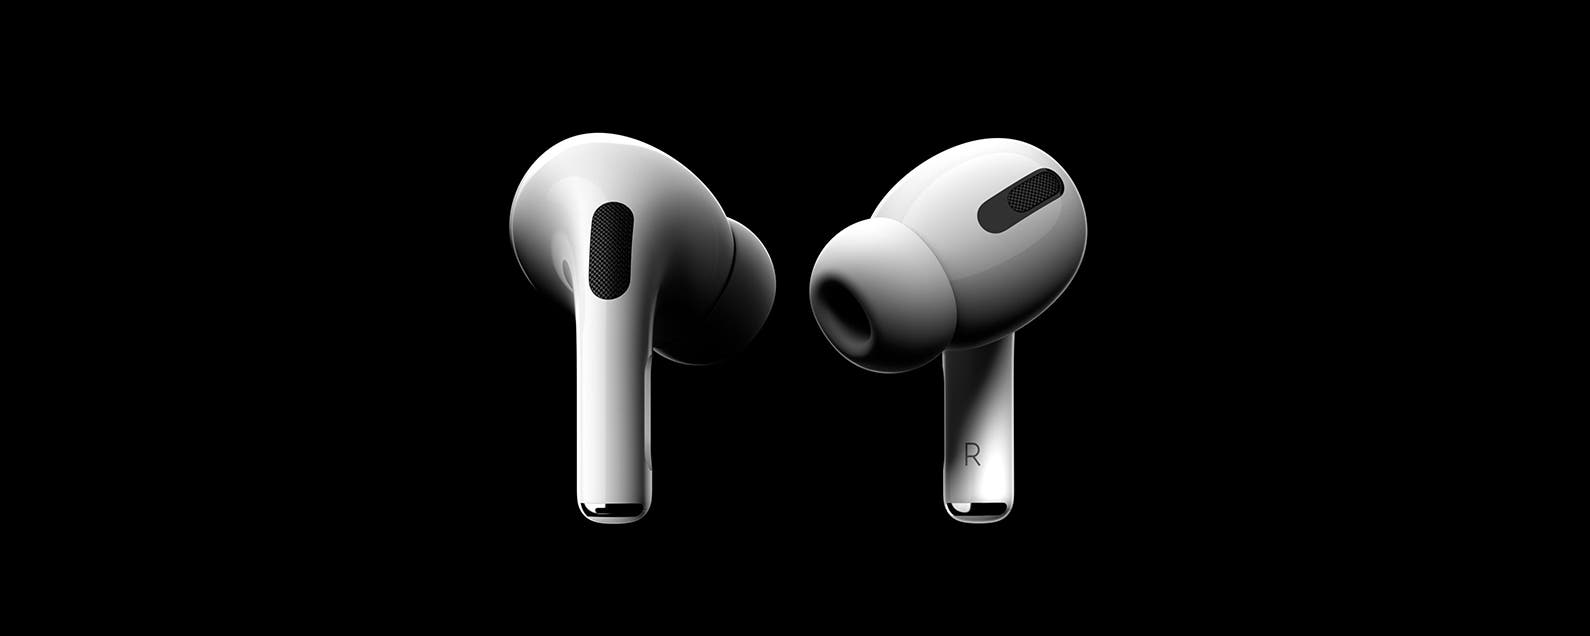 Last-Minute Apple Deals Include Low Prices on AirPods, iPad, and More -  MacRumors